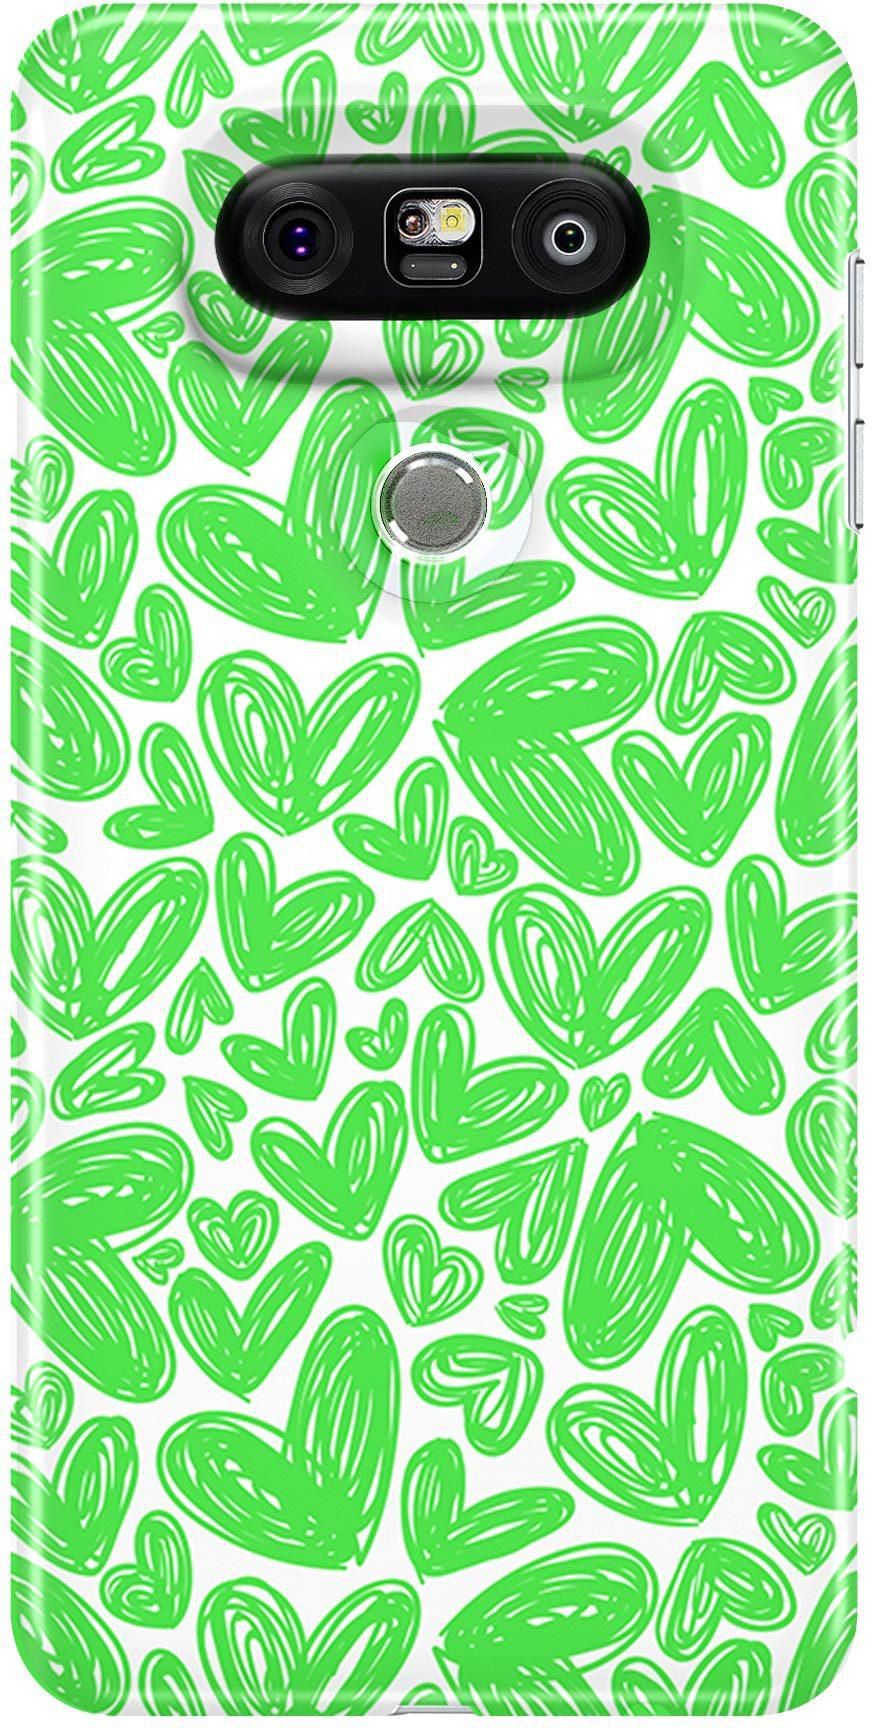 Green Hearts Love Memories Sweets 3D New Unique Strong Full Wrap Hard Case Cover Protector for LG G5